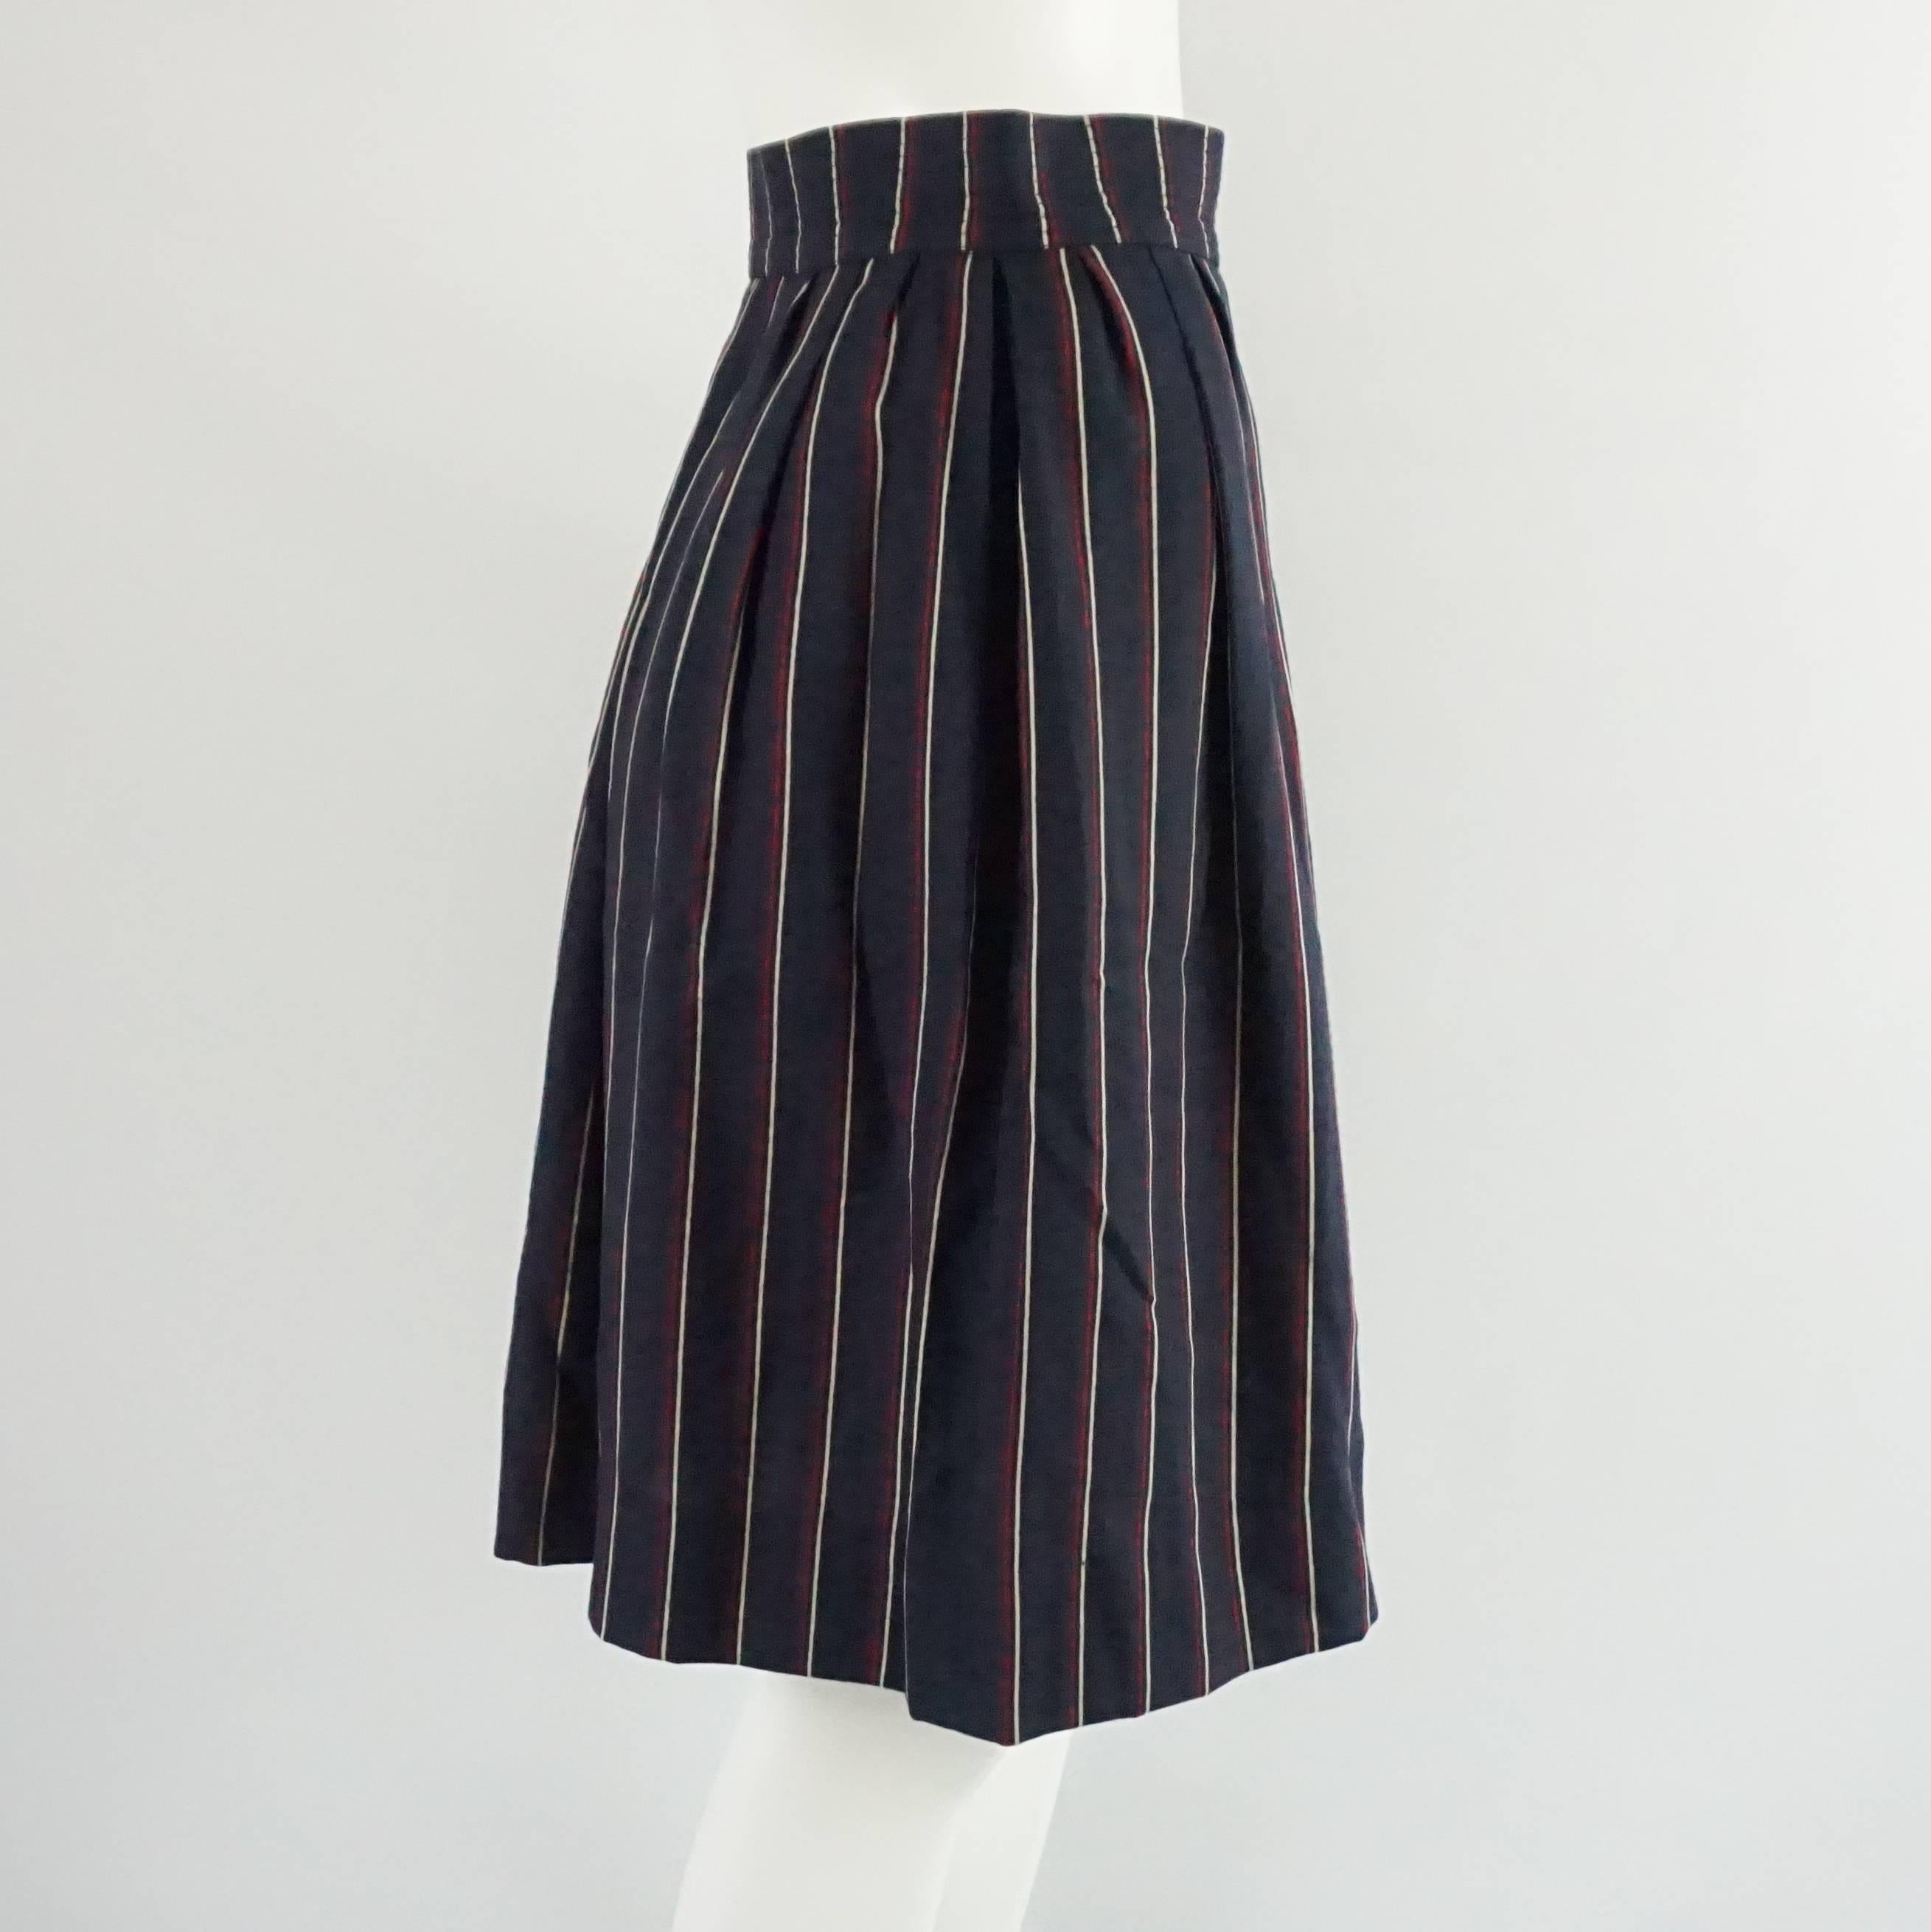 This YSL wool skirt is navy with thin red and white stripes. It is high waisted, has pockets, and falls above the knee. The piece is in excellent vintage condition with minimal wear. Size 36, circa 1960's. 

Measurements
Waist: 25.5